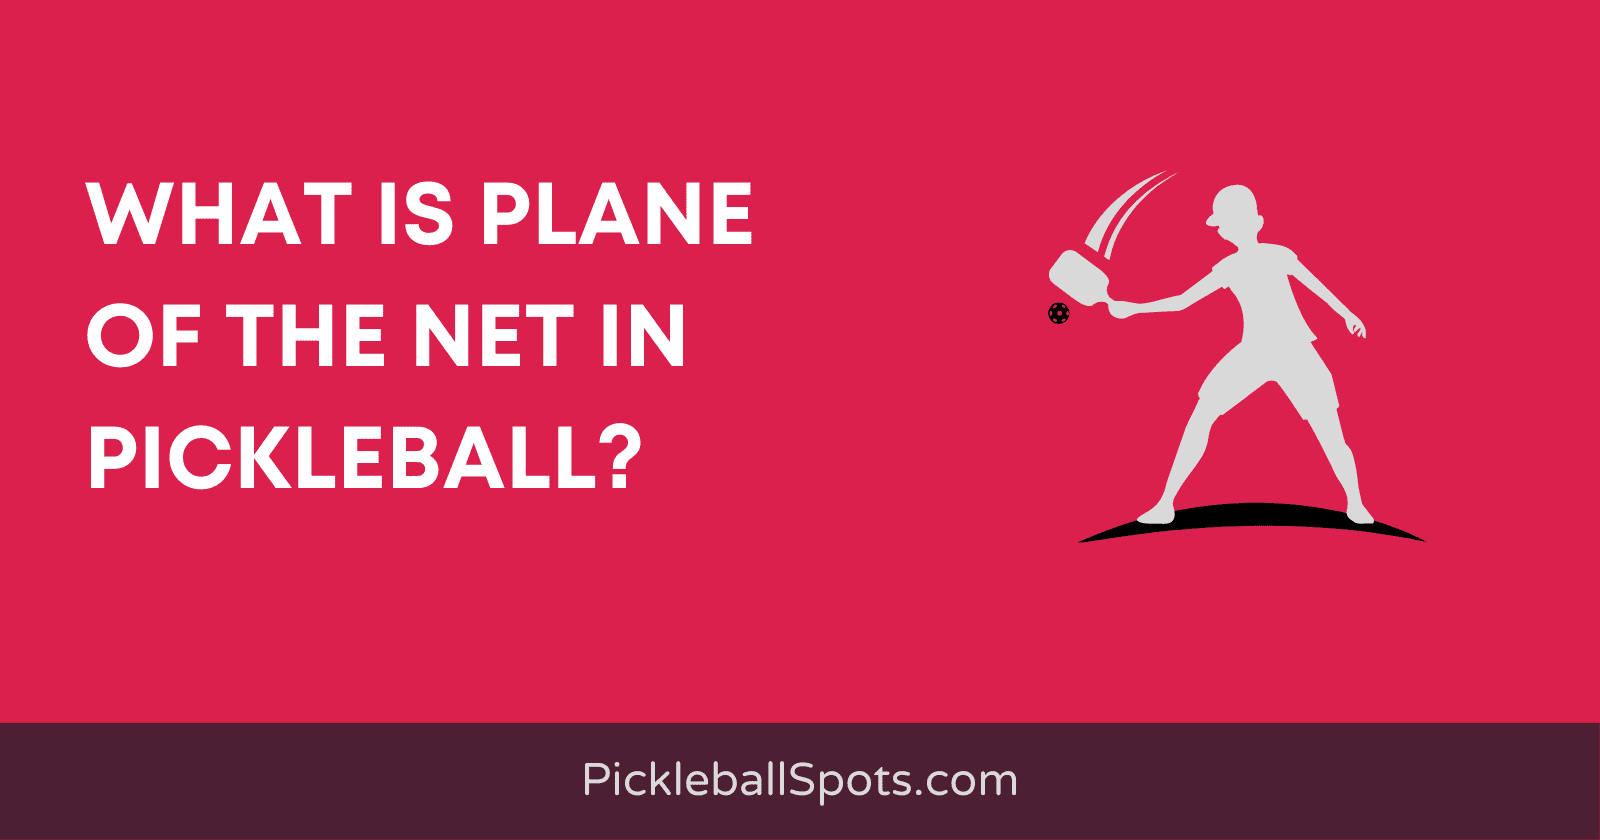 What Is Plane Of The Net In Pickleball